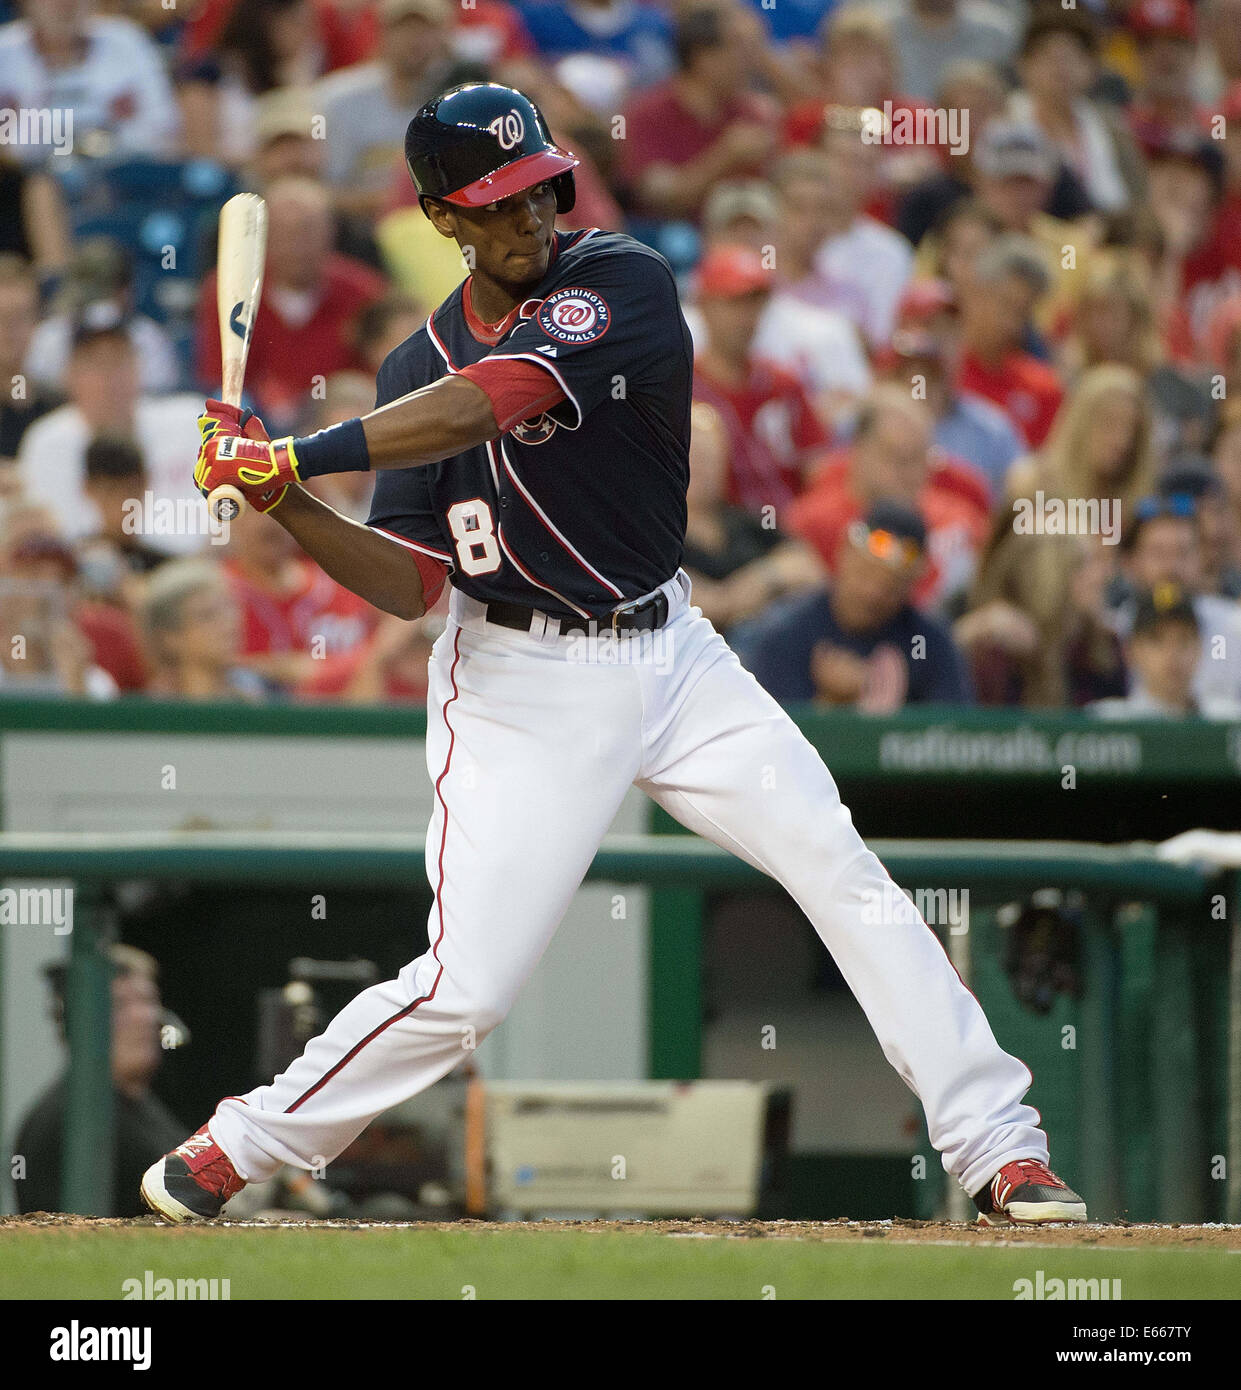 Washington, DC, USA. 15th Aug, 2014. Washington Nationals right fielder Michael Taylor (18) at bat against the Pittsburgh Pirates during their game at Nationals Park in Washington, D.C, Friday, August 15, 2014. Credit:  Harry E. Walker/ZUMA Wire/Alamy Live News Stock Photo